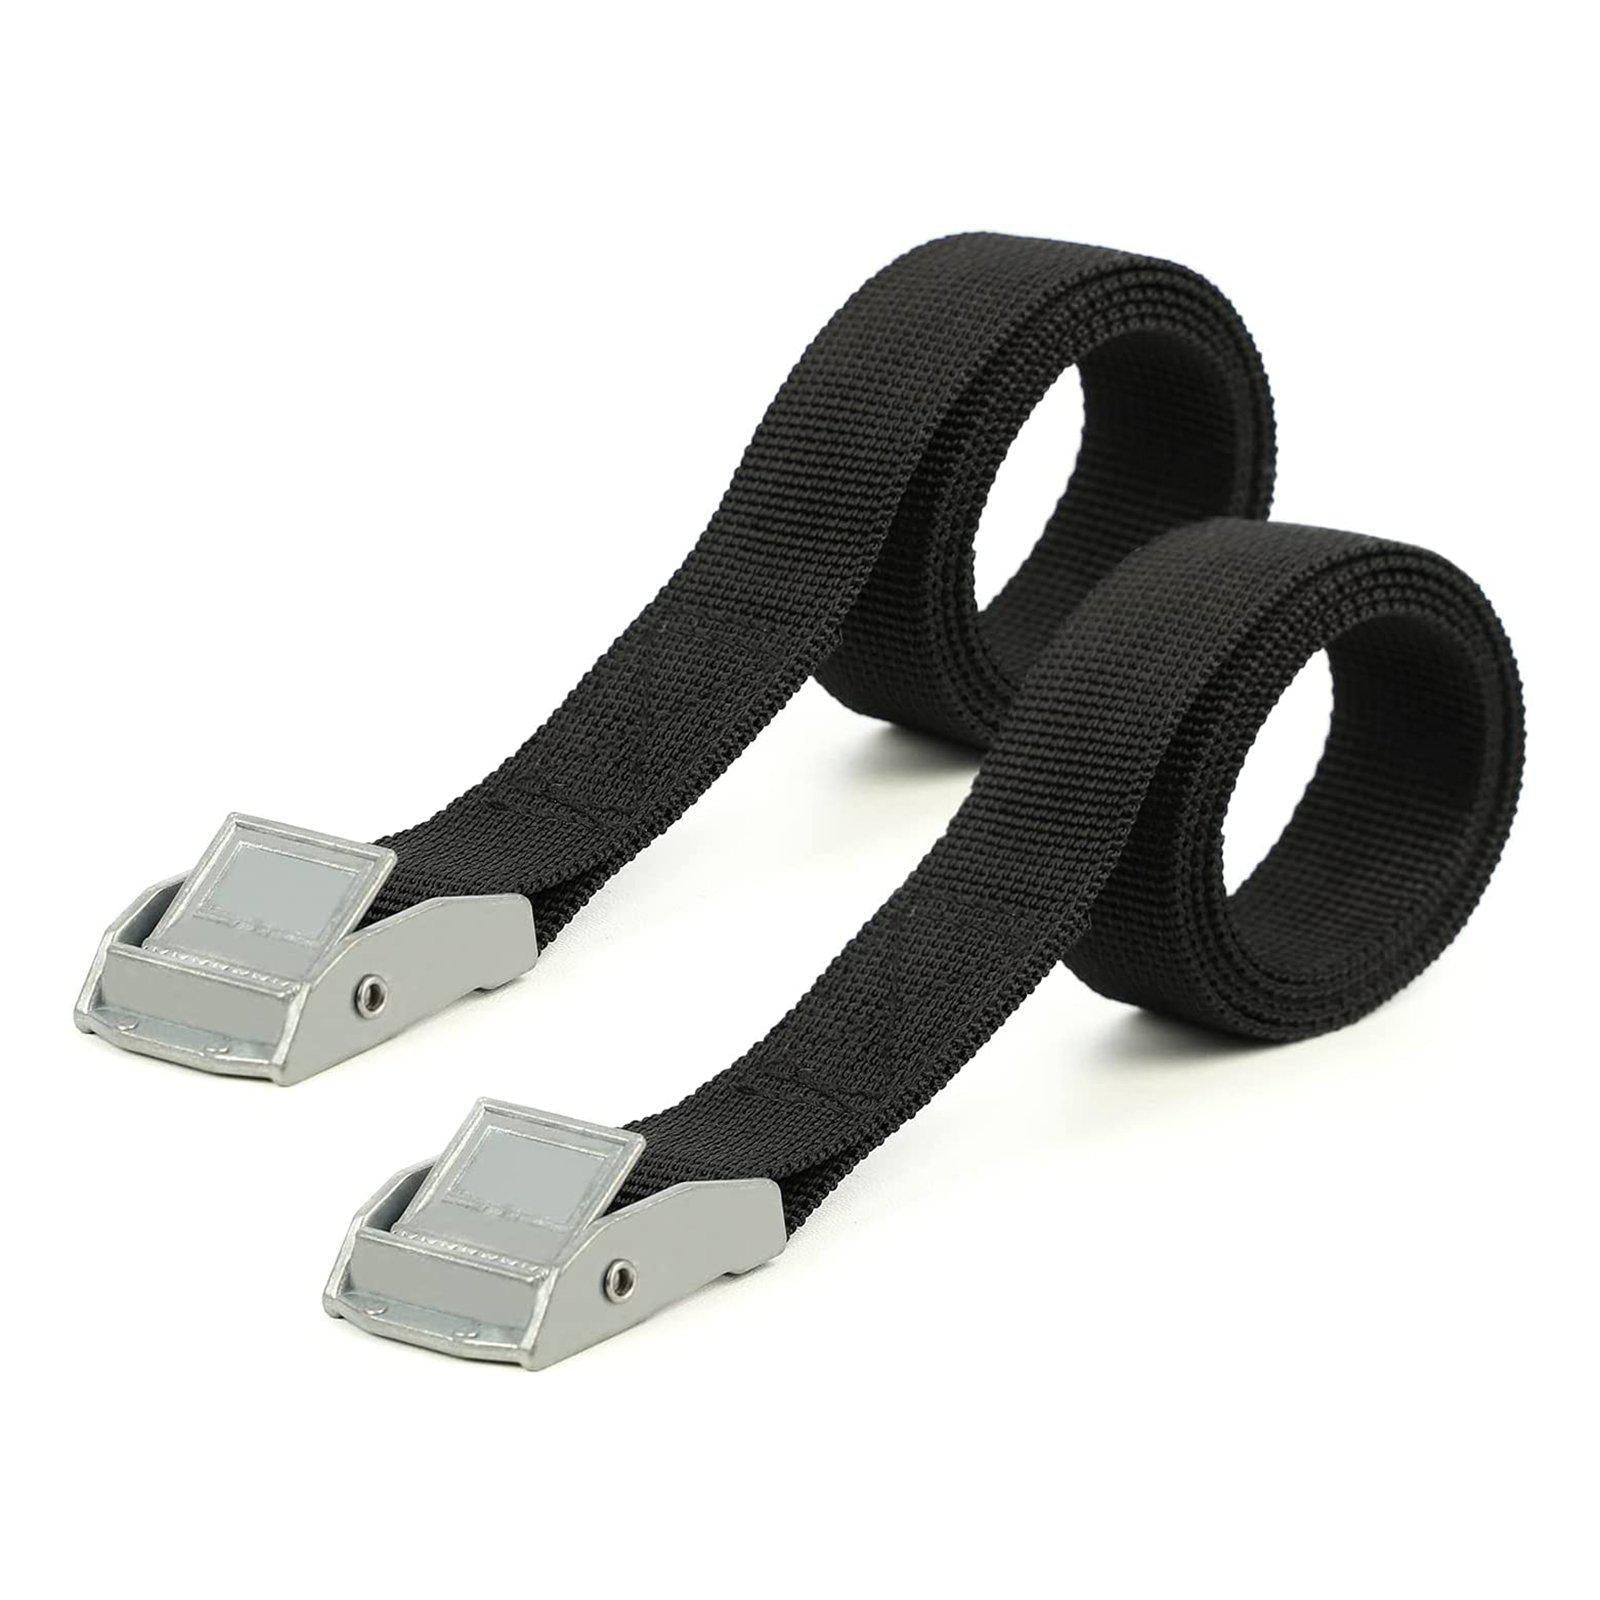 Replacement Plastic Straps Kit Fit for Slide Mount, 2 Pieces - www.icecofreezer.com